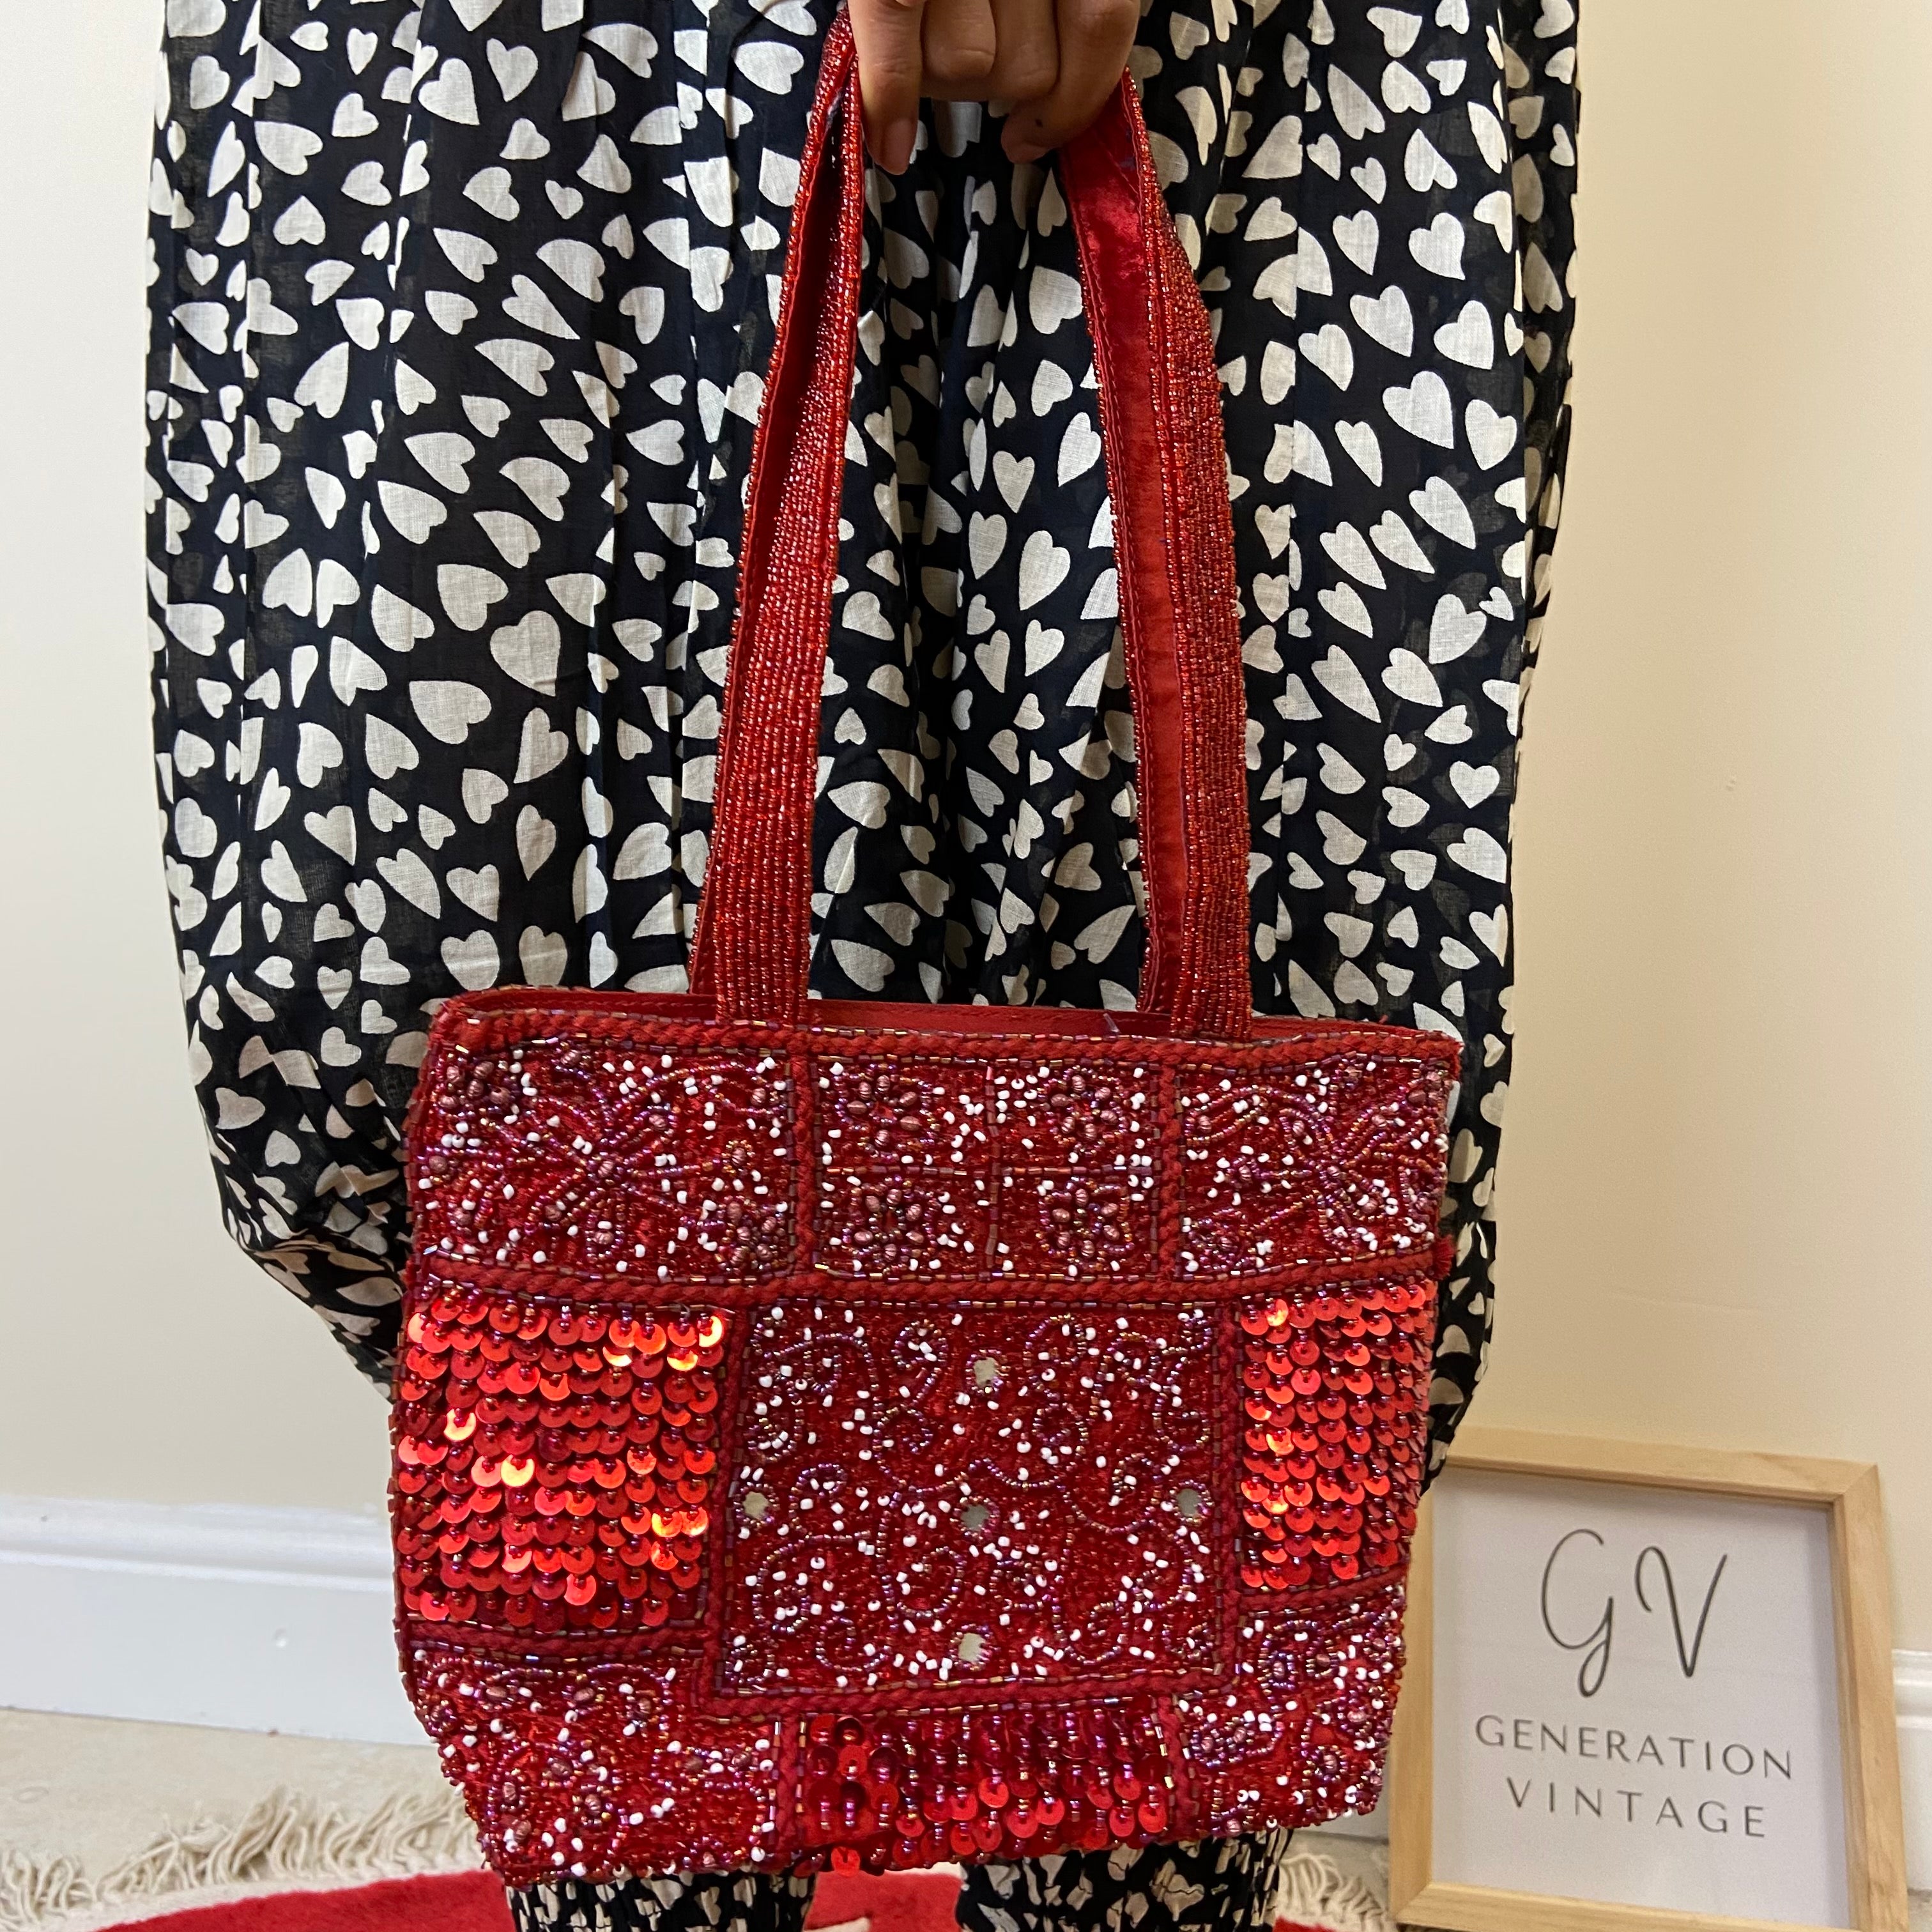 Sequin and Beaded Handbag - Red